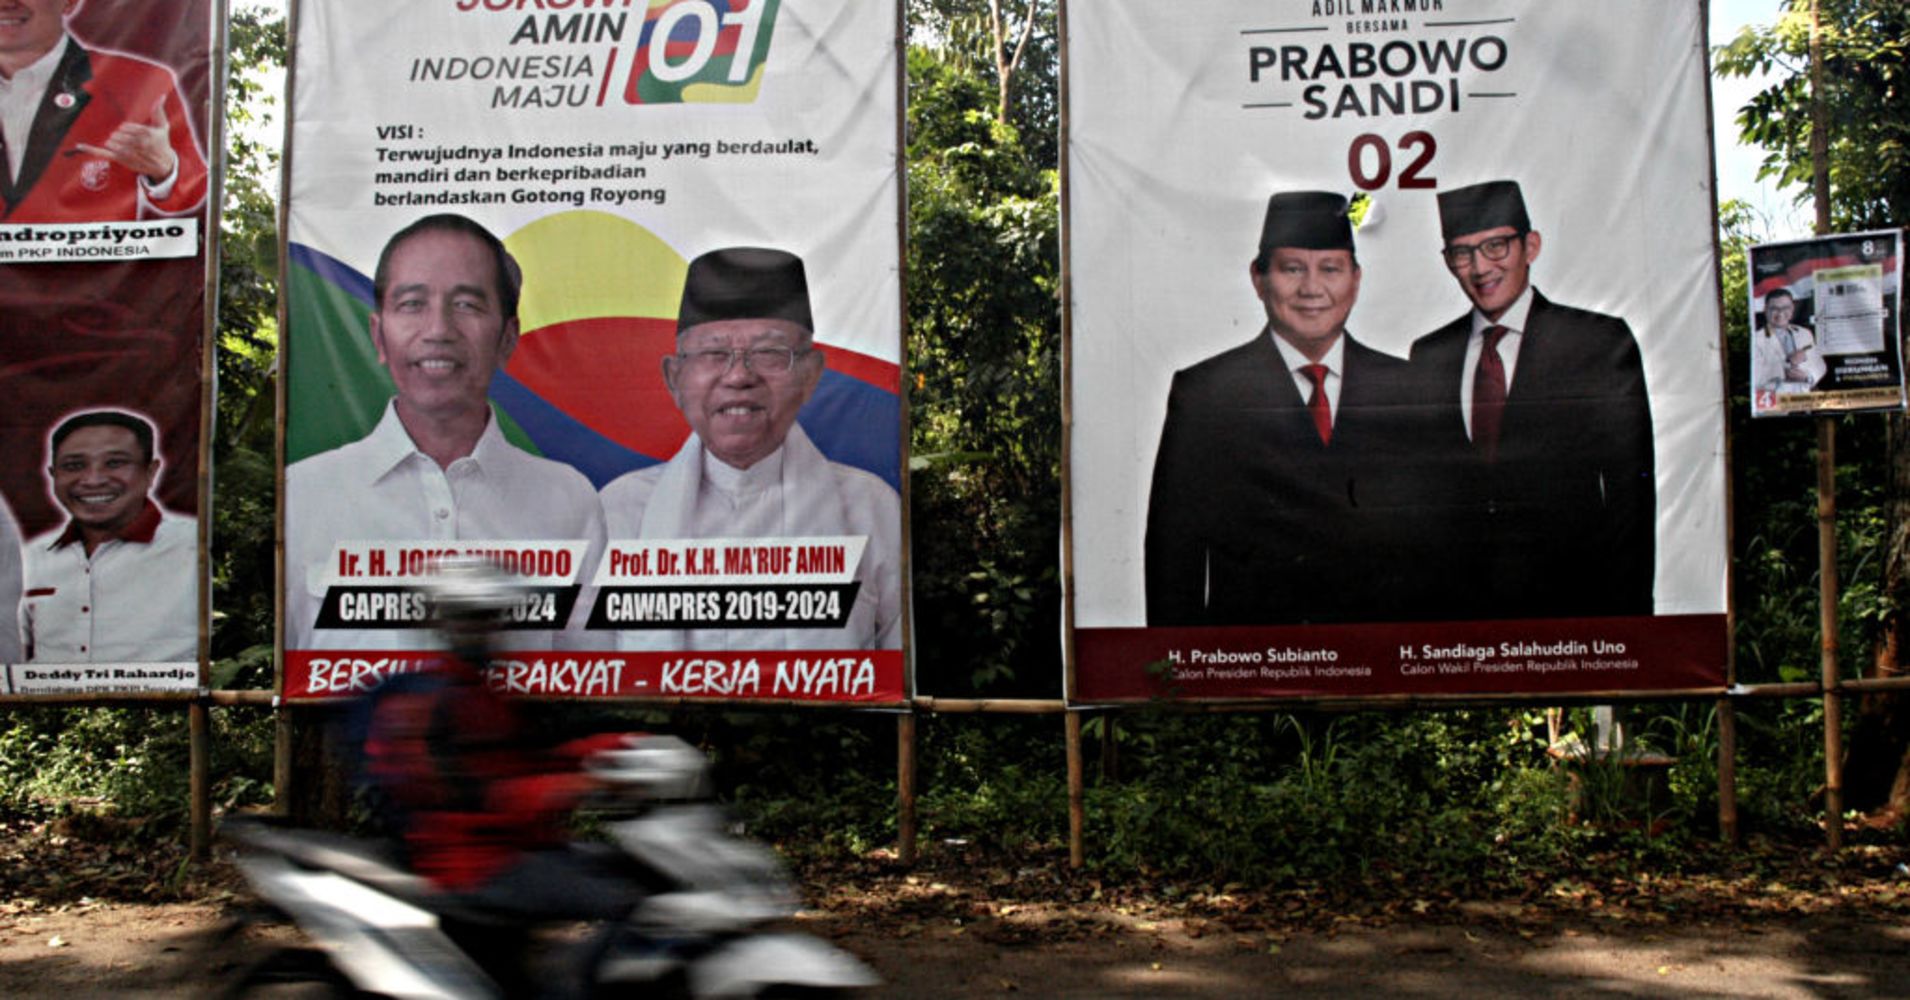 Motorists pass electoral posters in Central Java Province ahead of the presidential and legislative elections. Indonesia is set to hold simultaneous presidential and parliamentary elections on April 17.